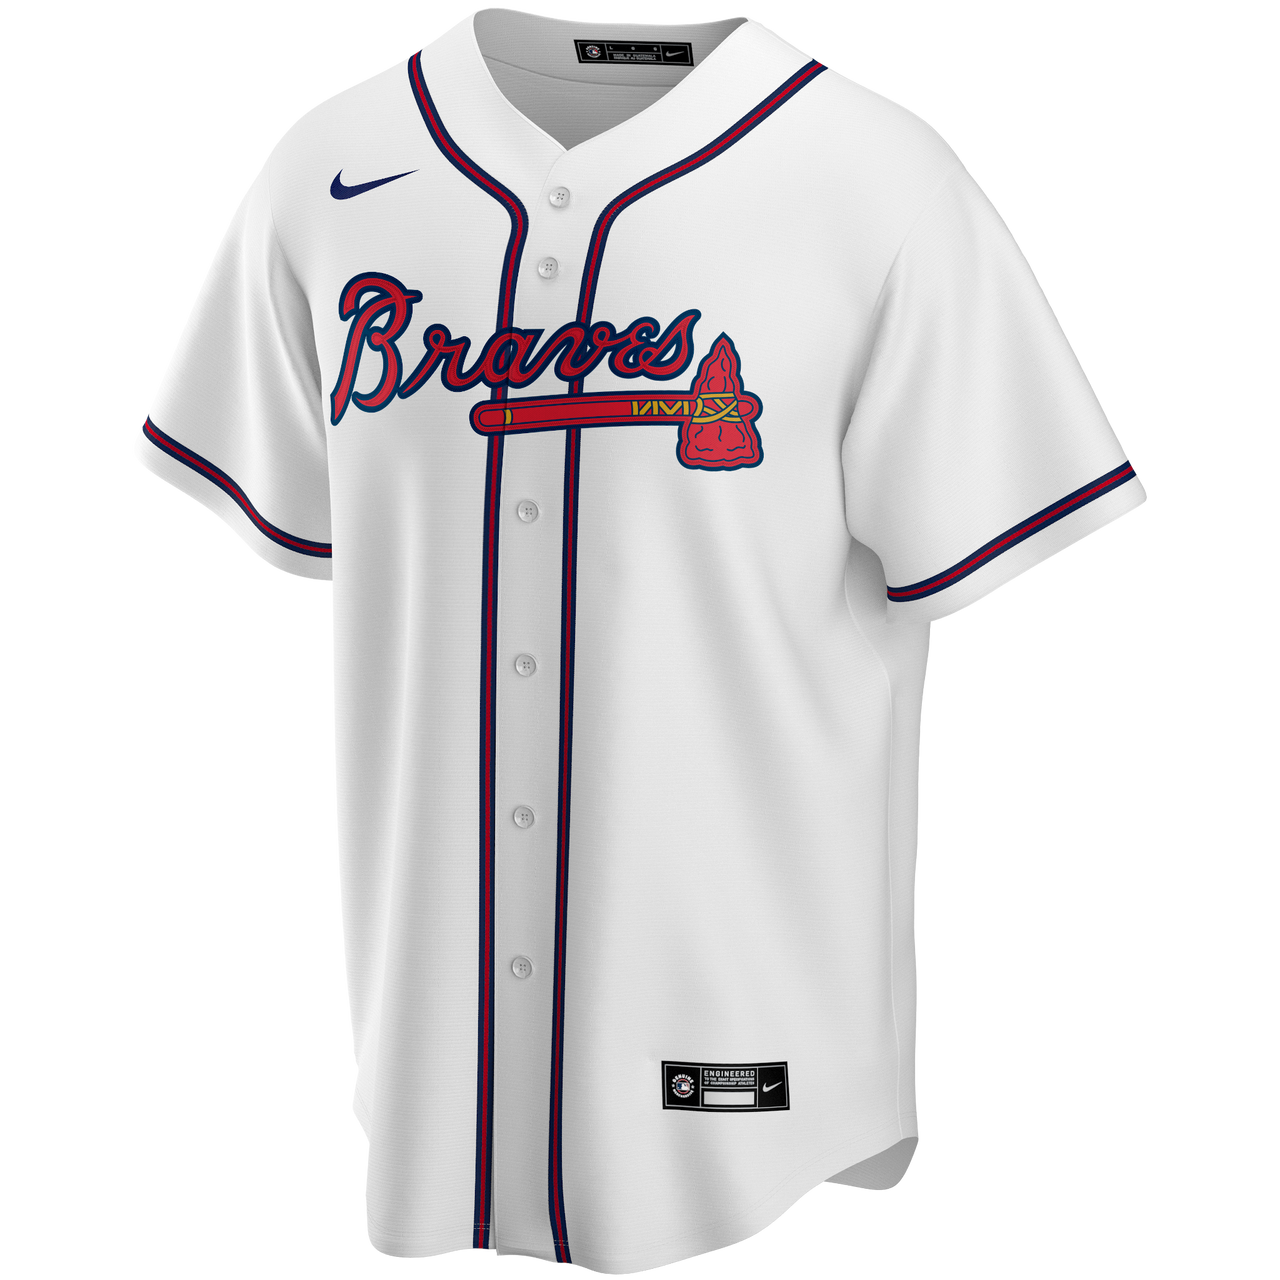 ozzie albies youth jersey